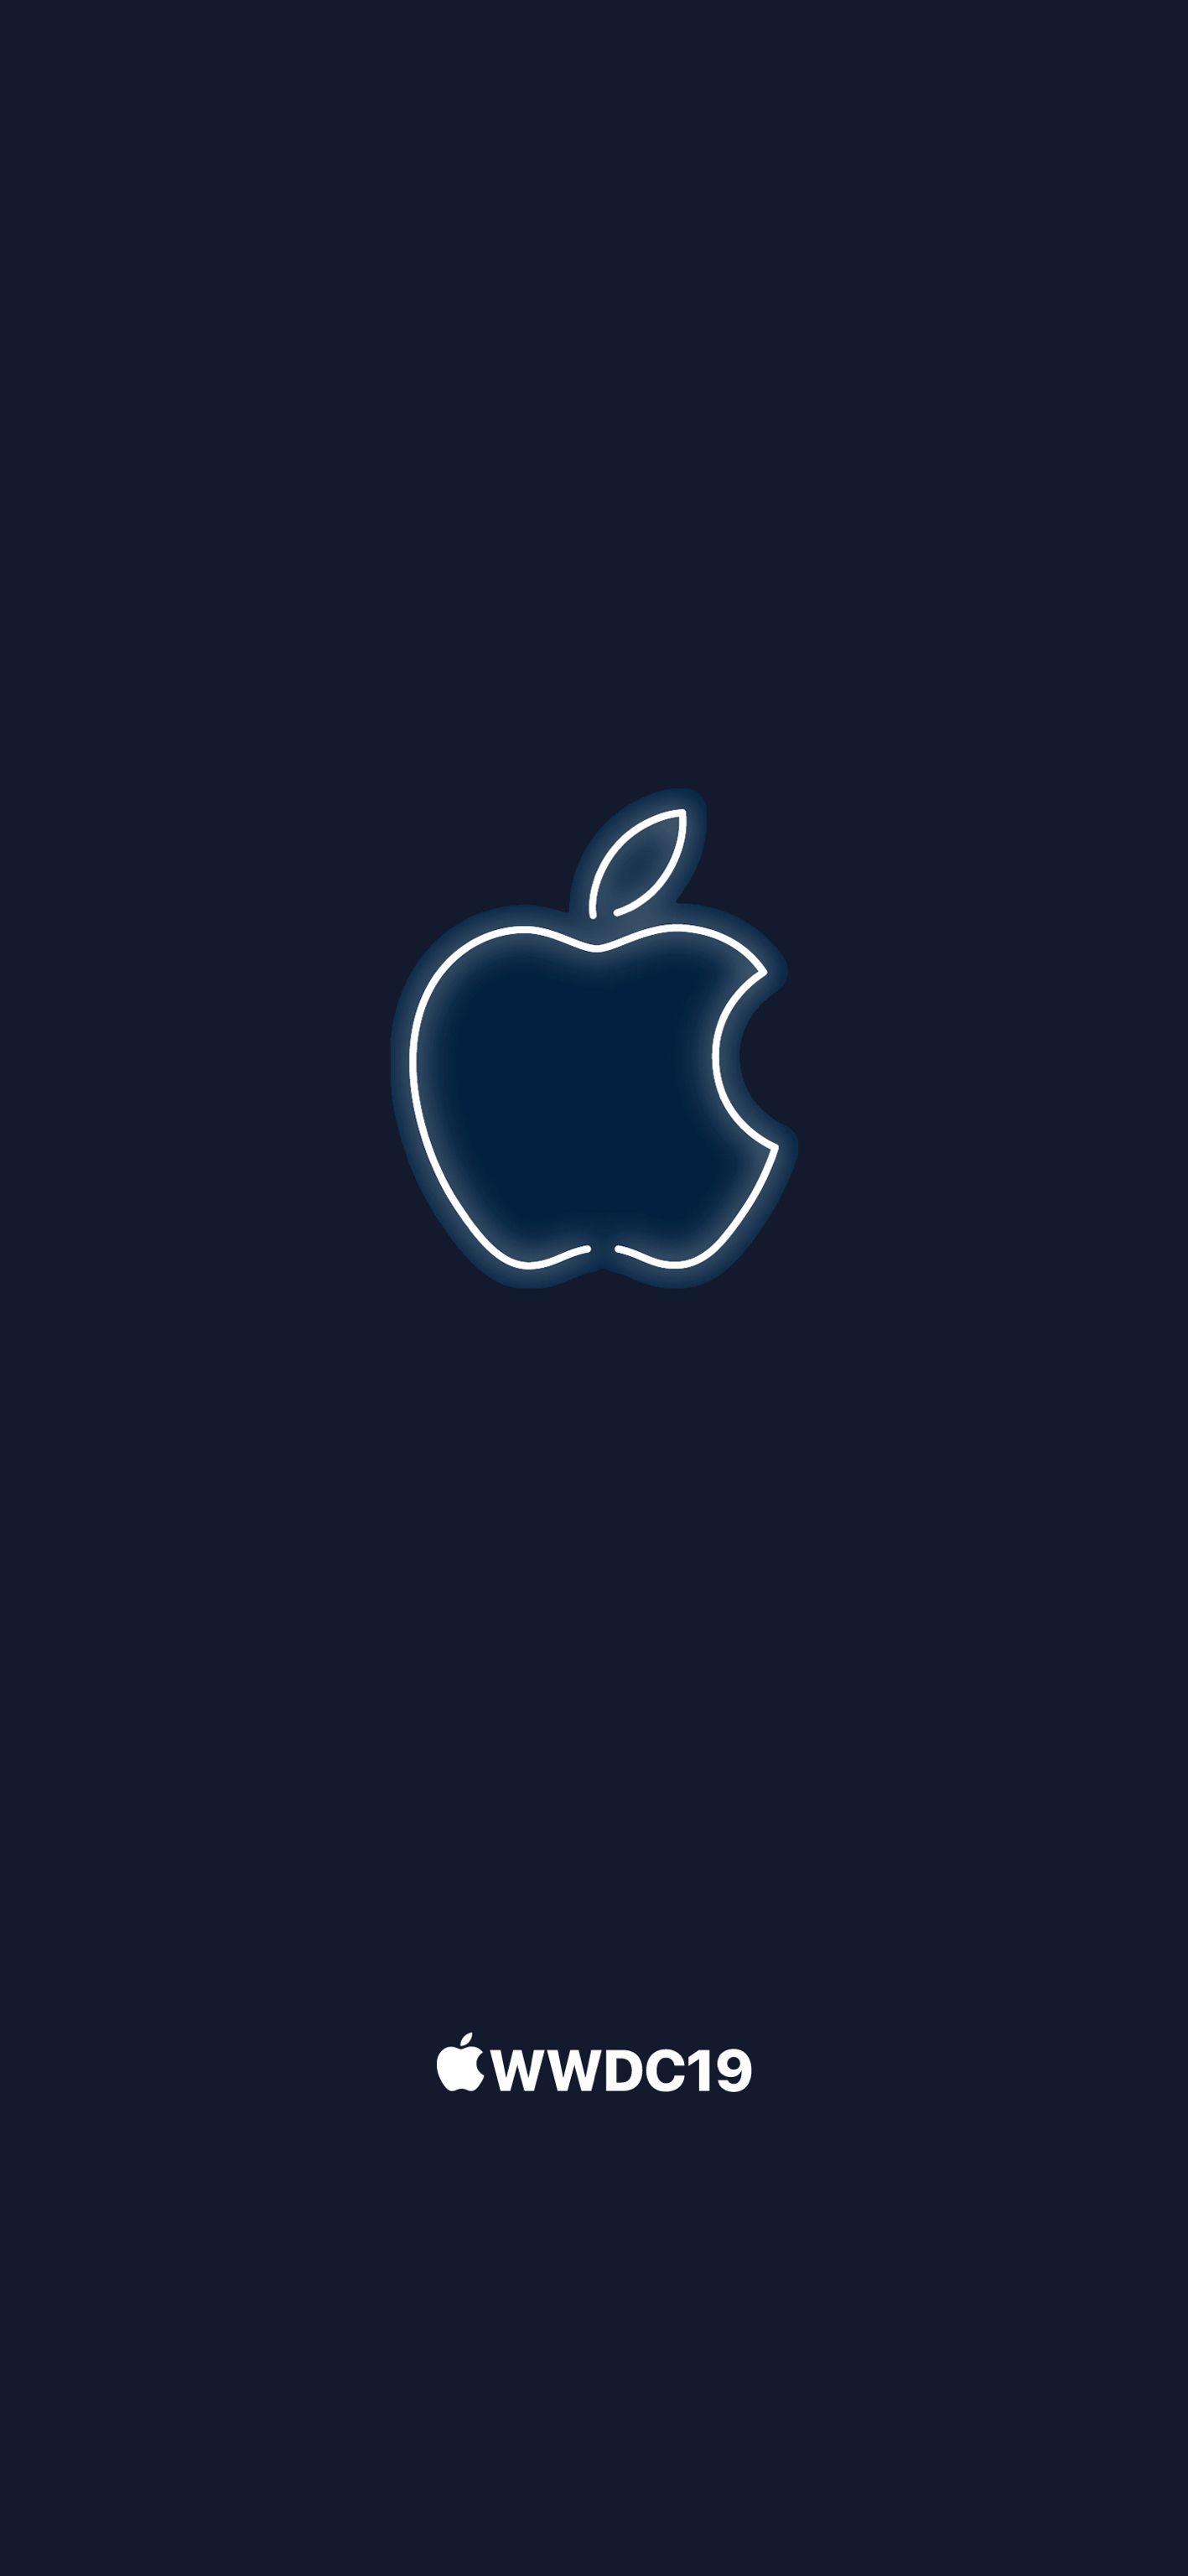 Awesome Neon Wallpapers Apple posted by Michelle Sellers